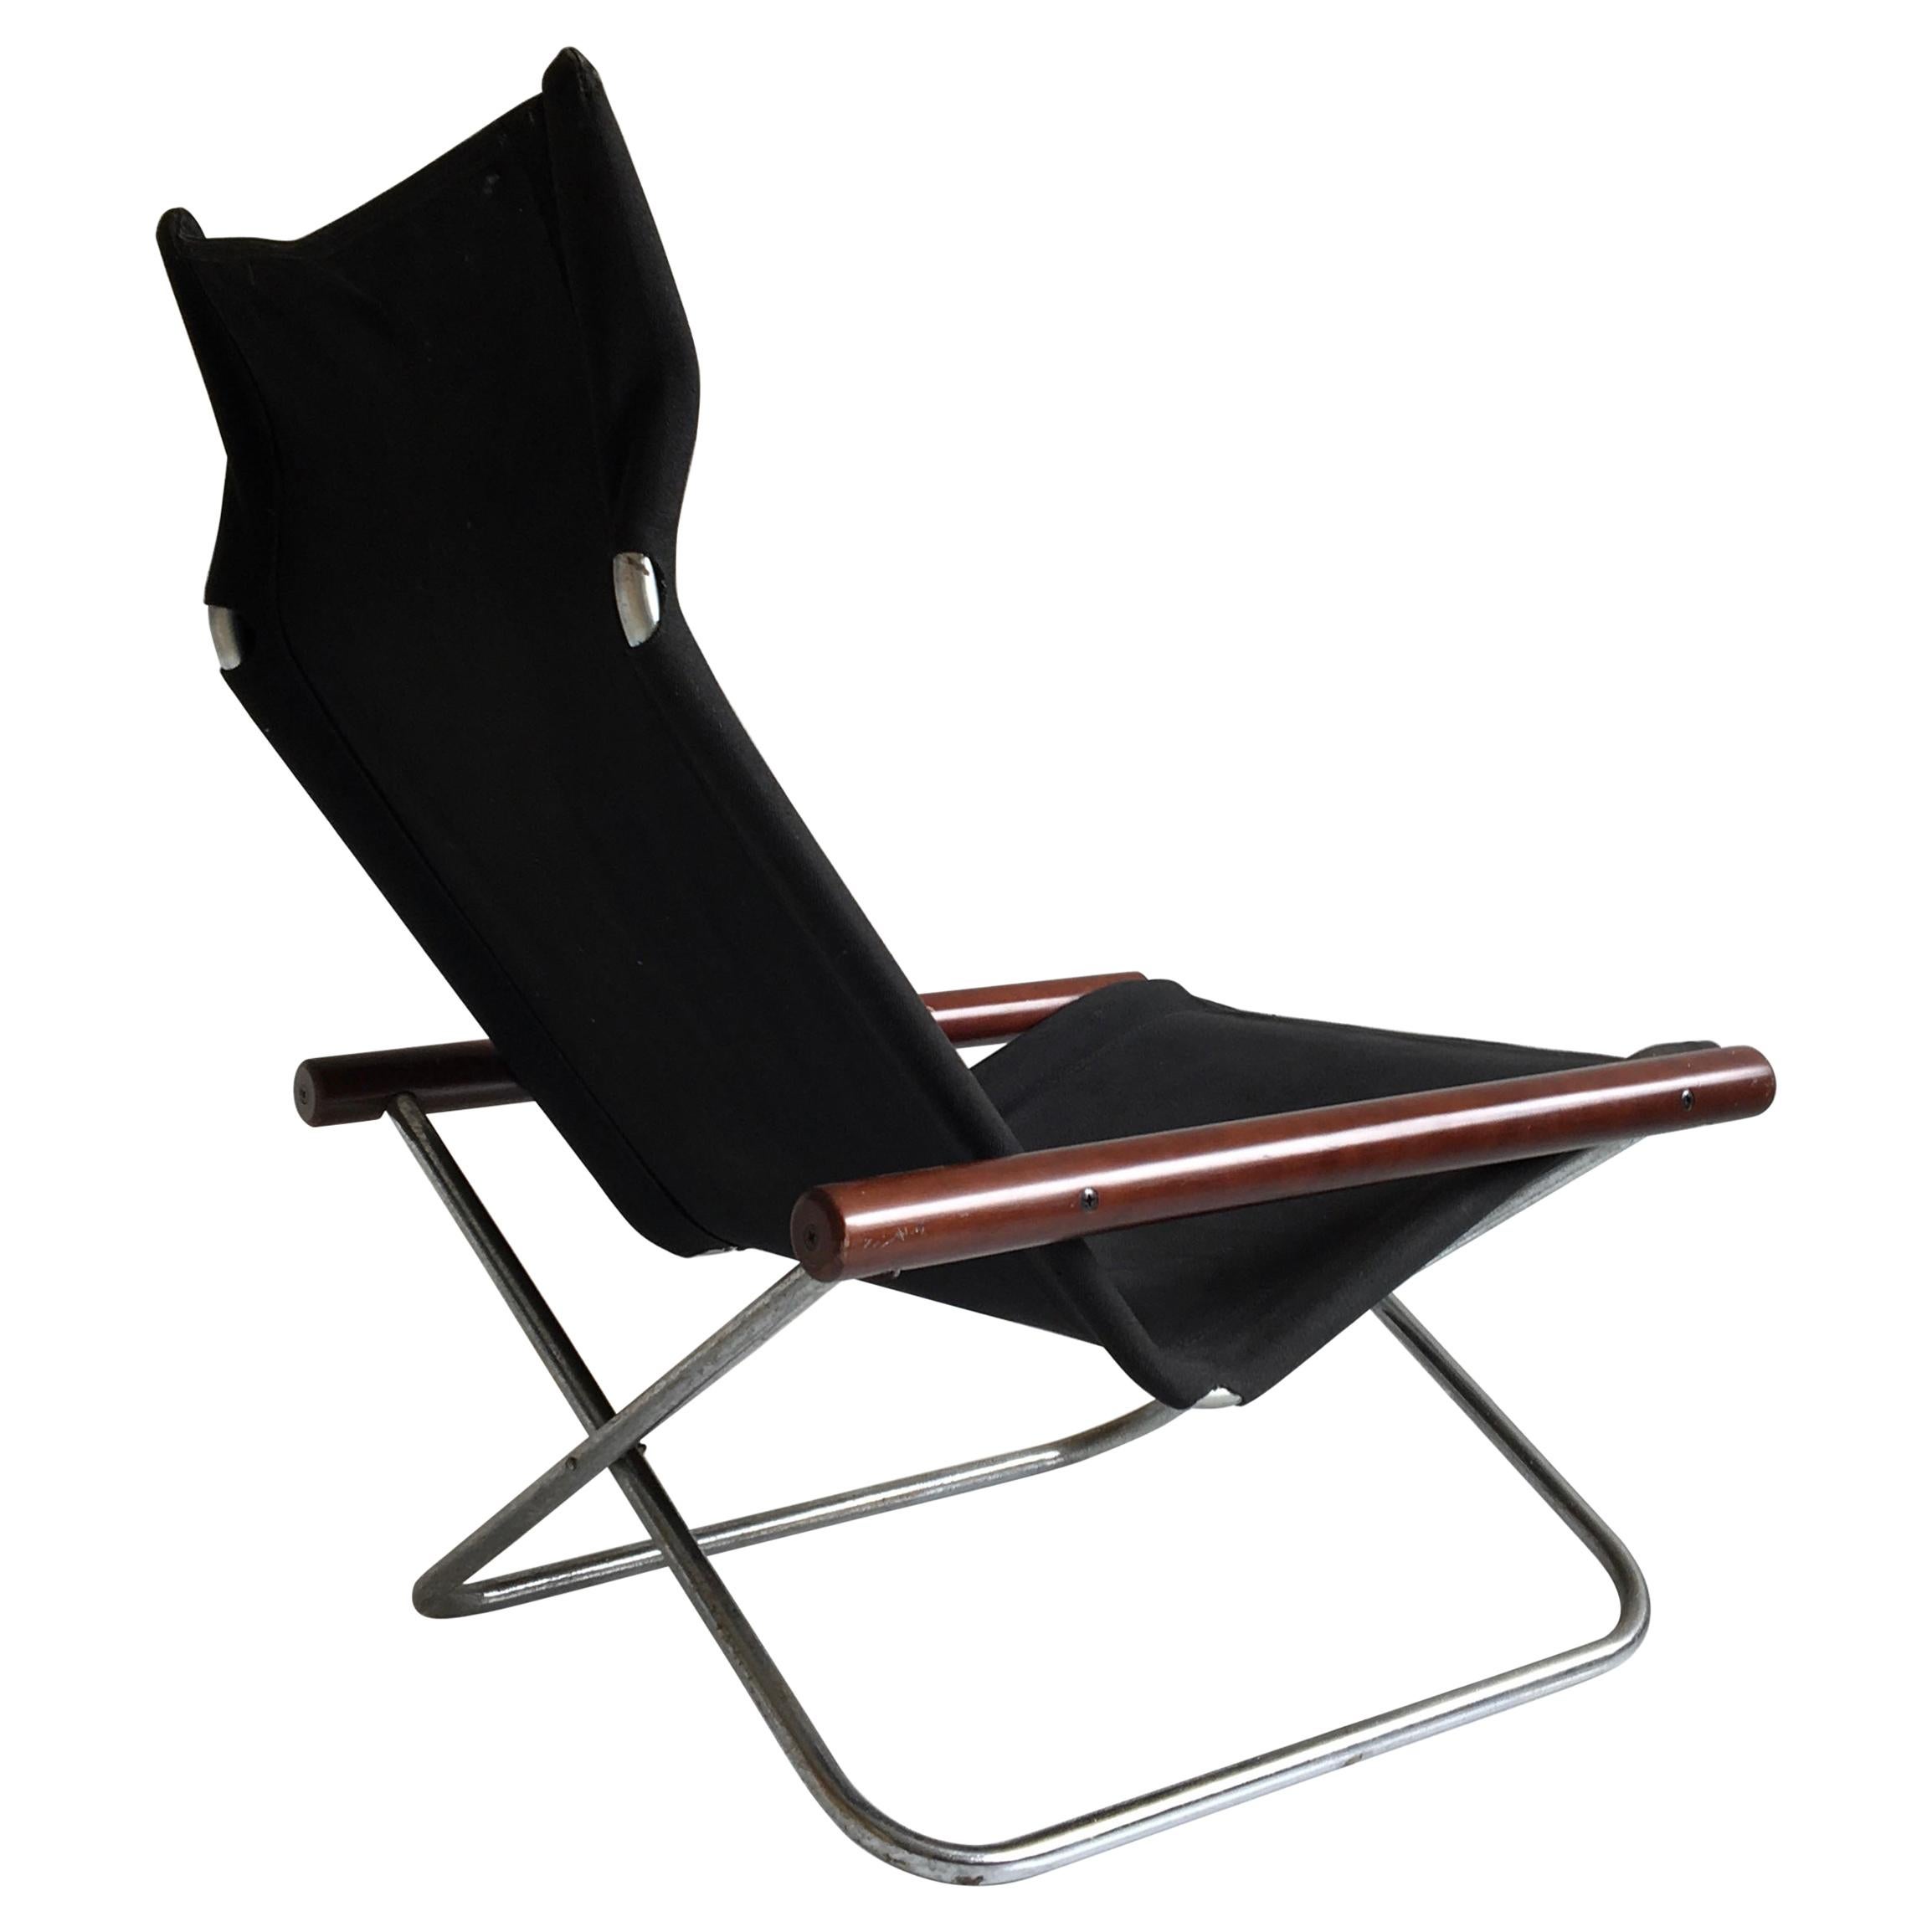 Midcentury Folding Black Canvas 'NY' Chair by Takeshi Nii, Japan, Designed, 1958 For Sale